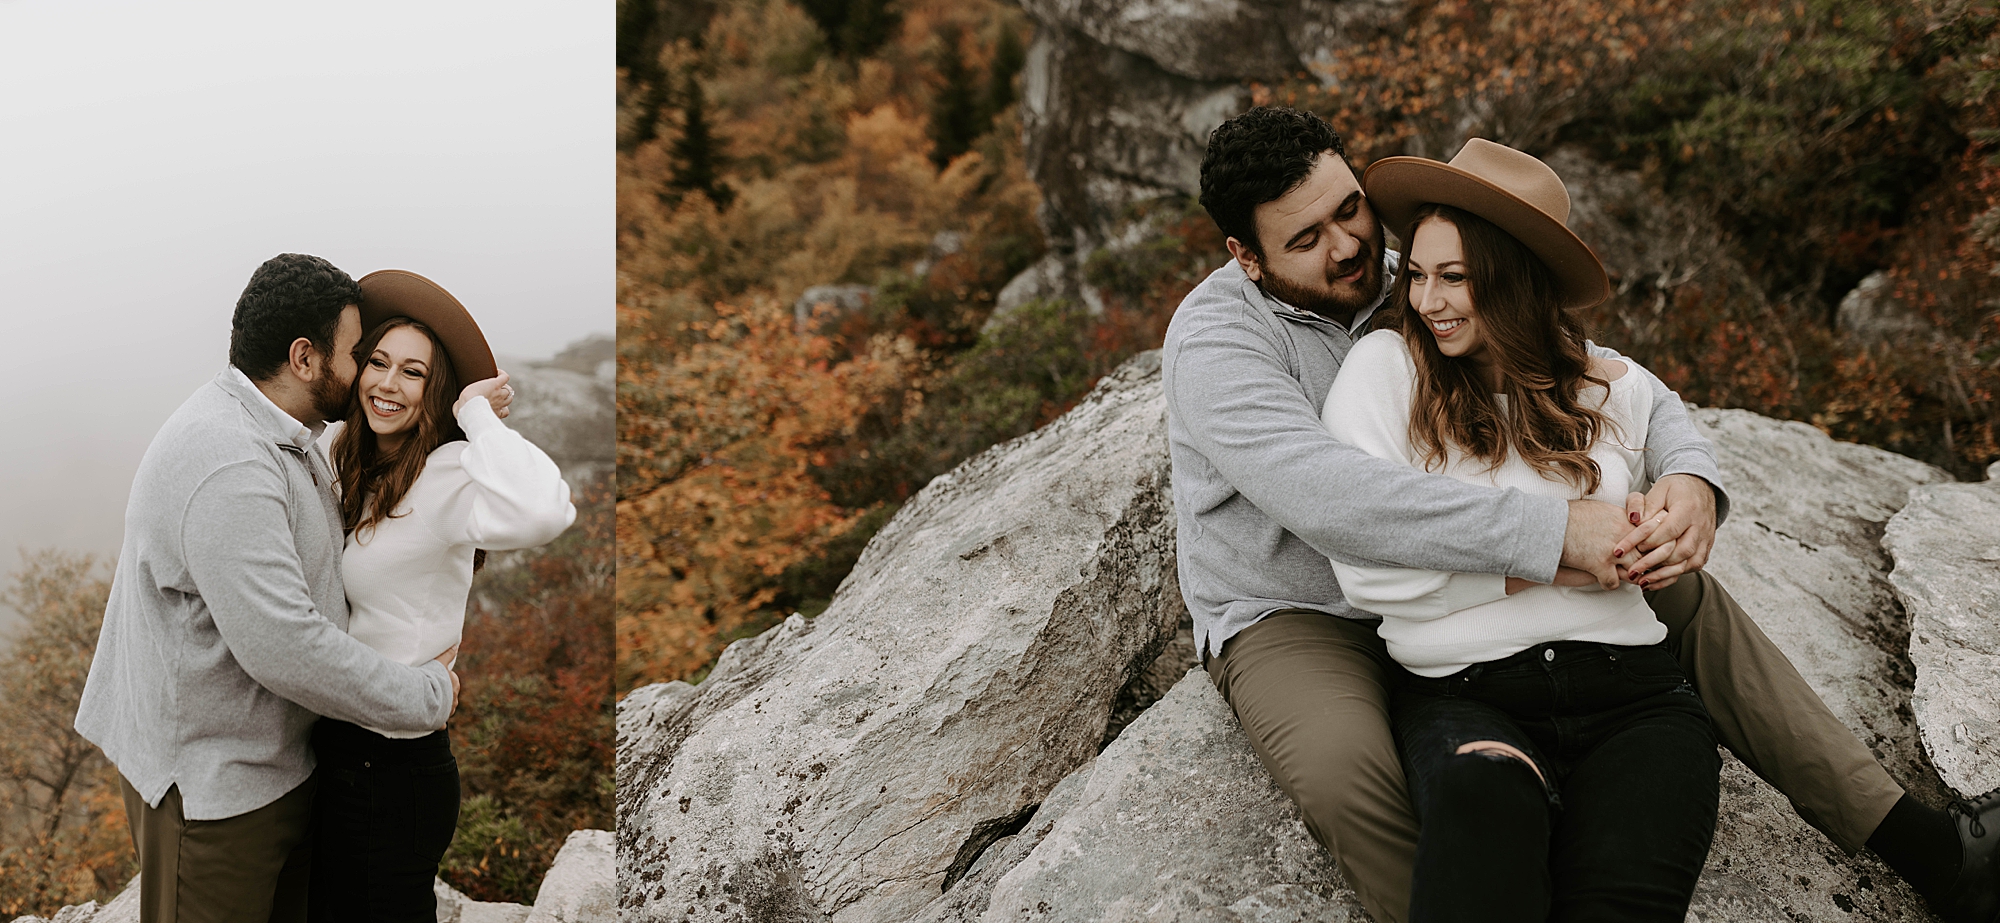 winter engagement photos, Mariah Treiber Photography, Asheville + Boone NC engagement locations